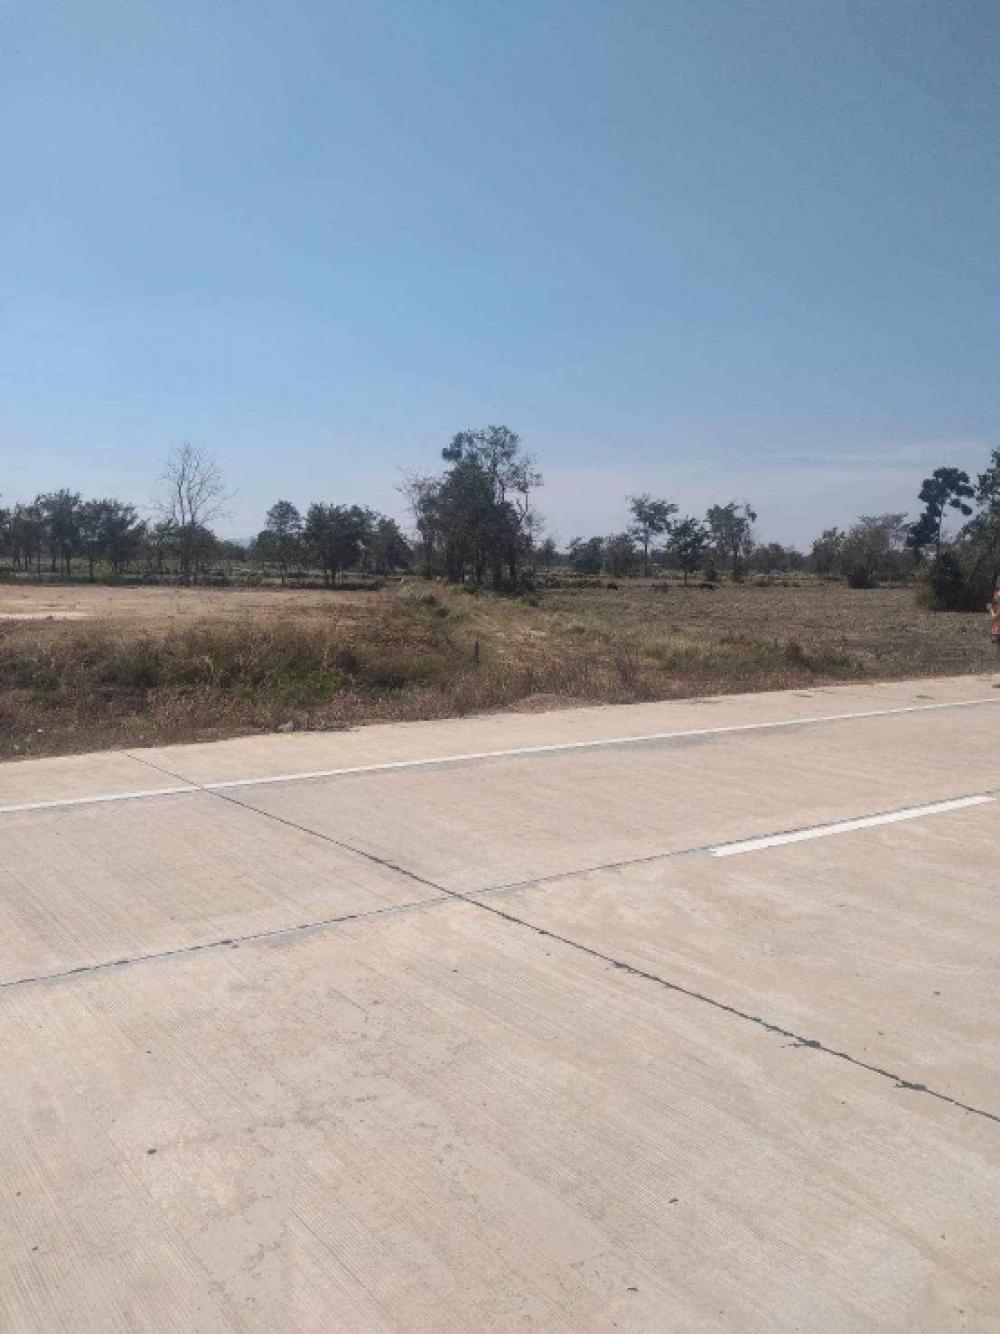 For SaleLandSa Kaeo : 🚩Land for sale in Aranyaprathet District, Sa Kaeo Province, cheap price, close to Road 3646, only 43 meters (logistics route), suitable for housing developments, warehouses.